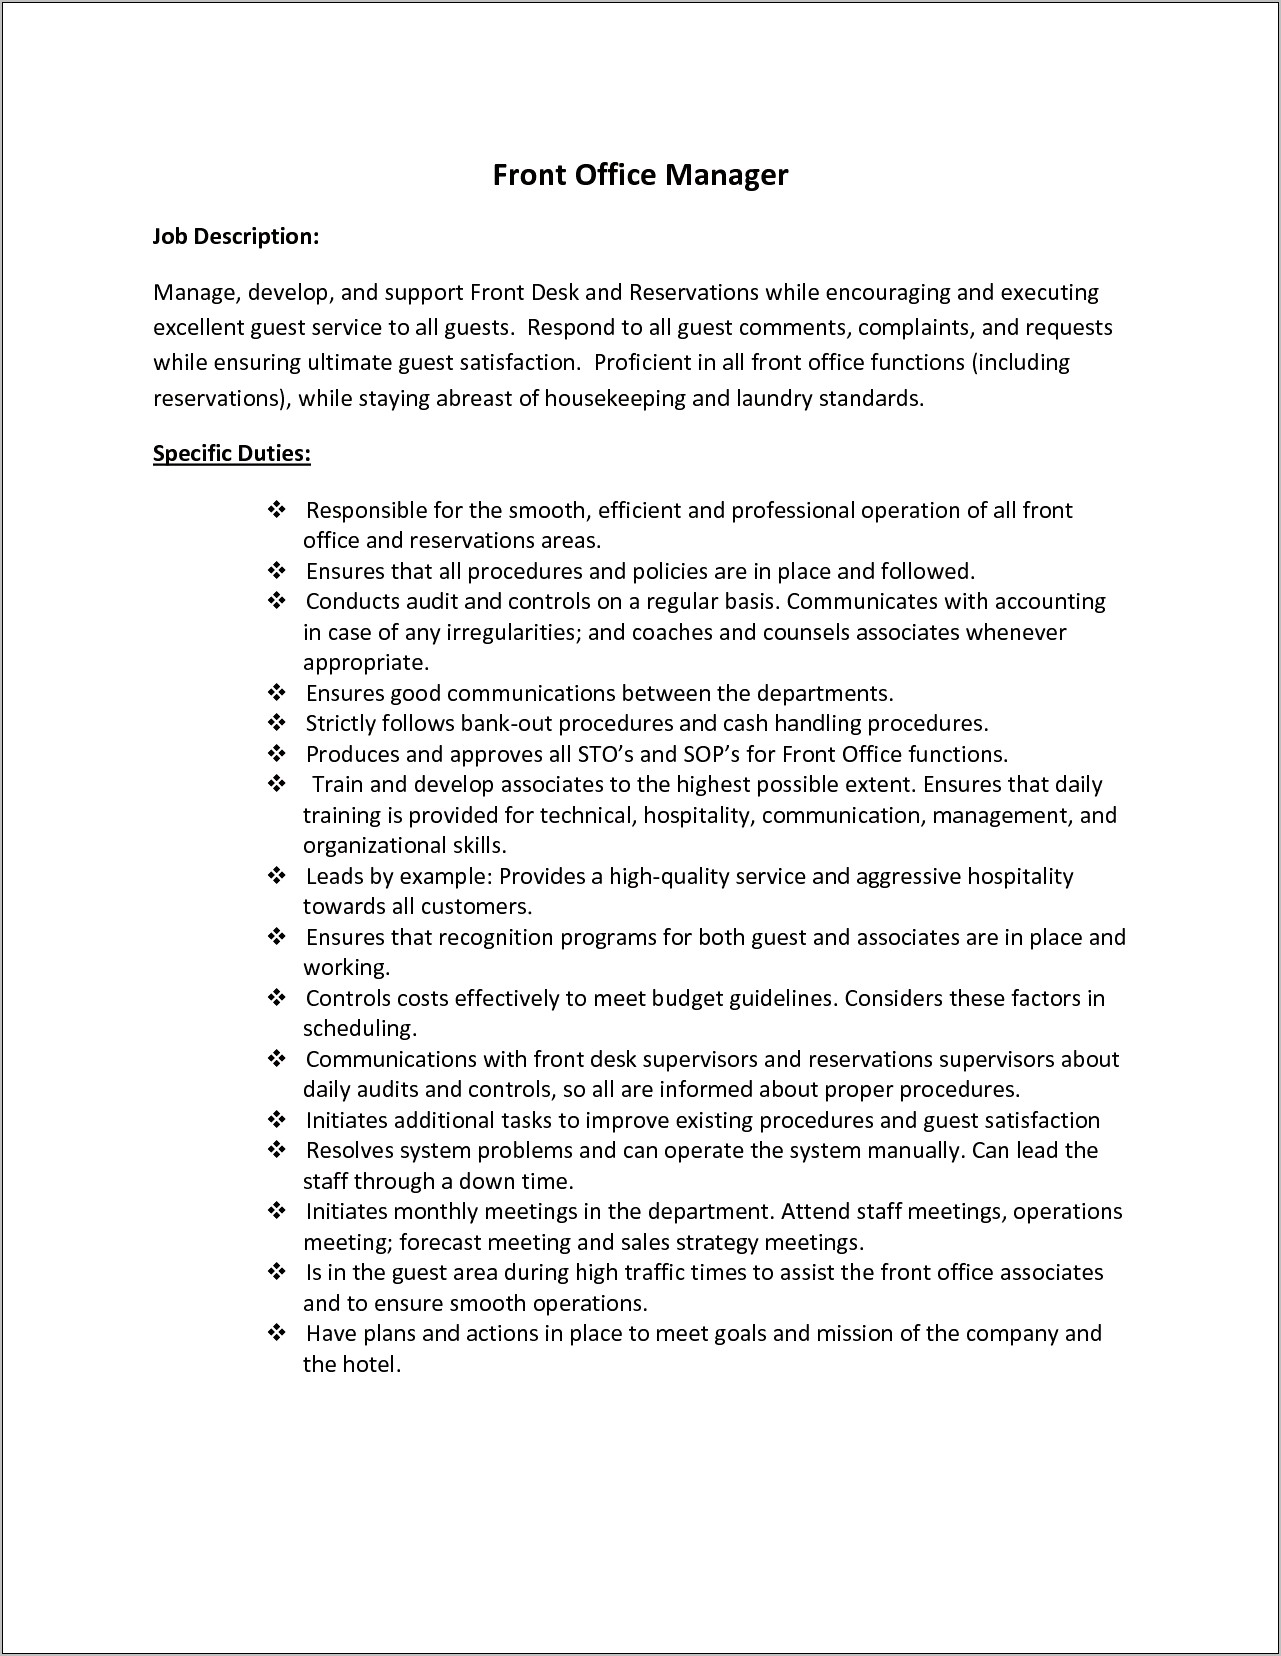 Resume Of Front Office Manager In Hotels